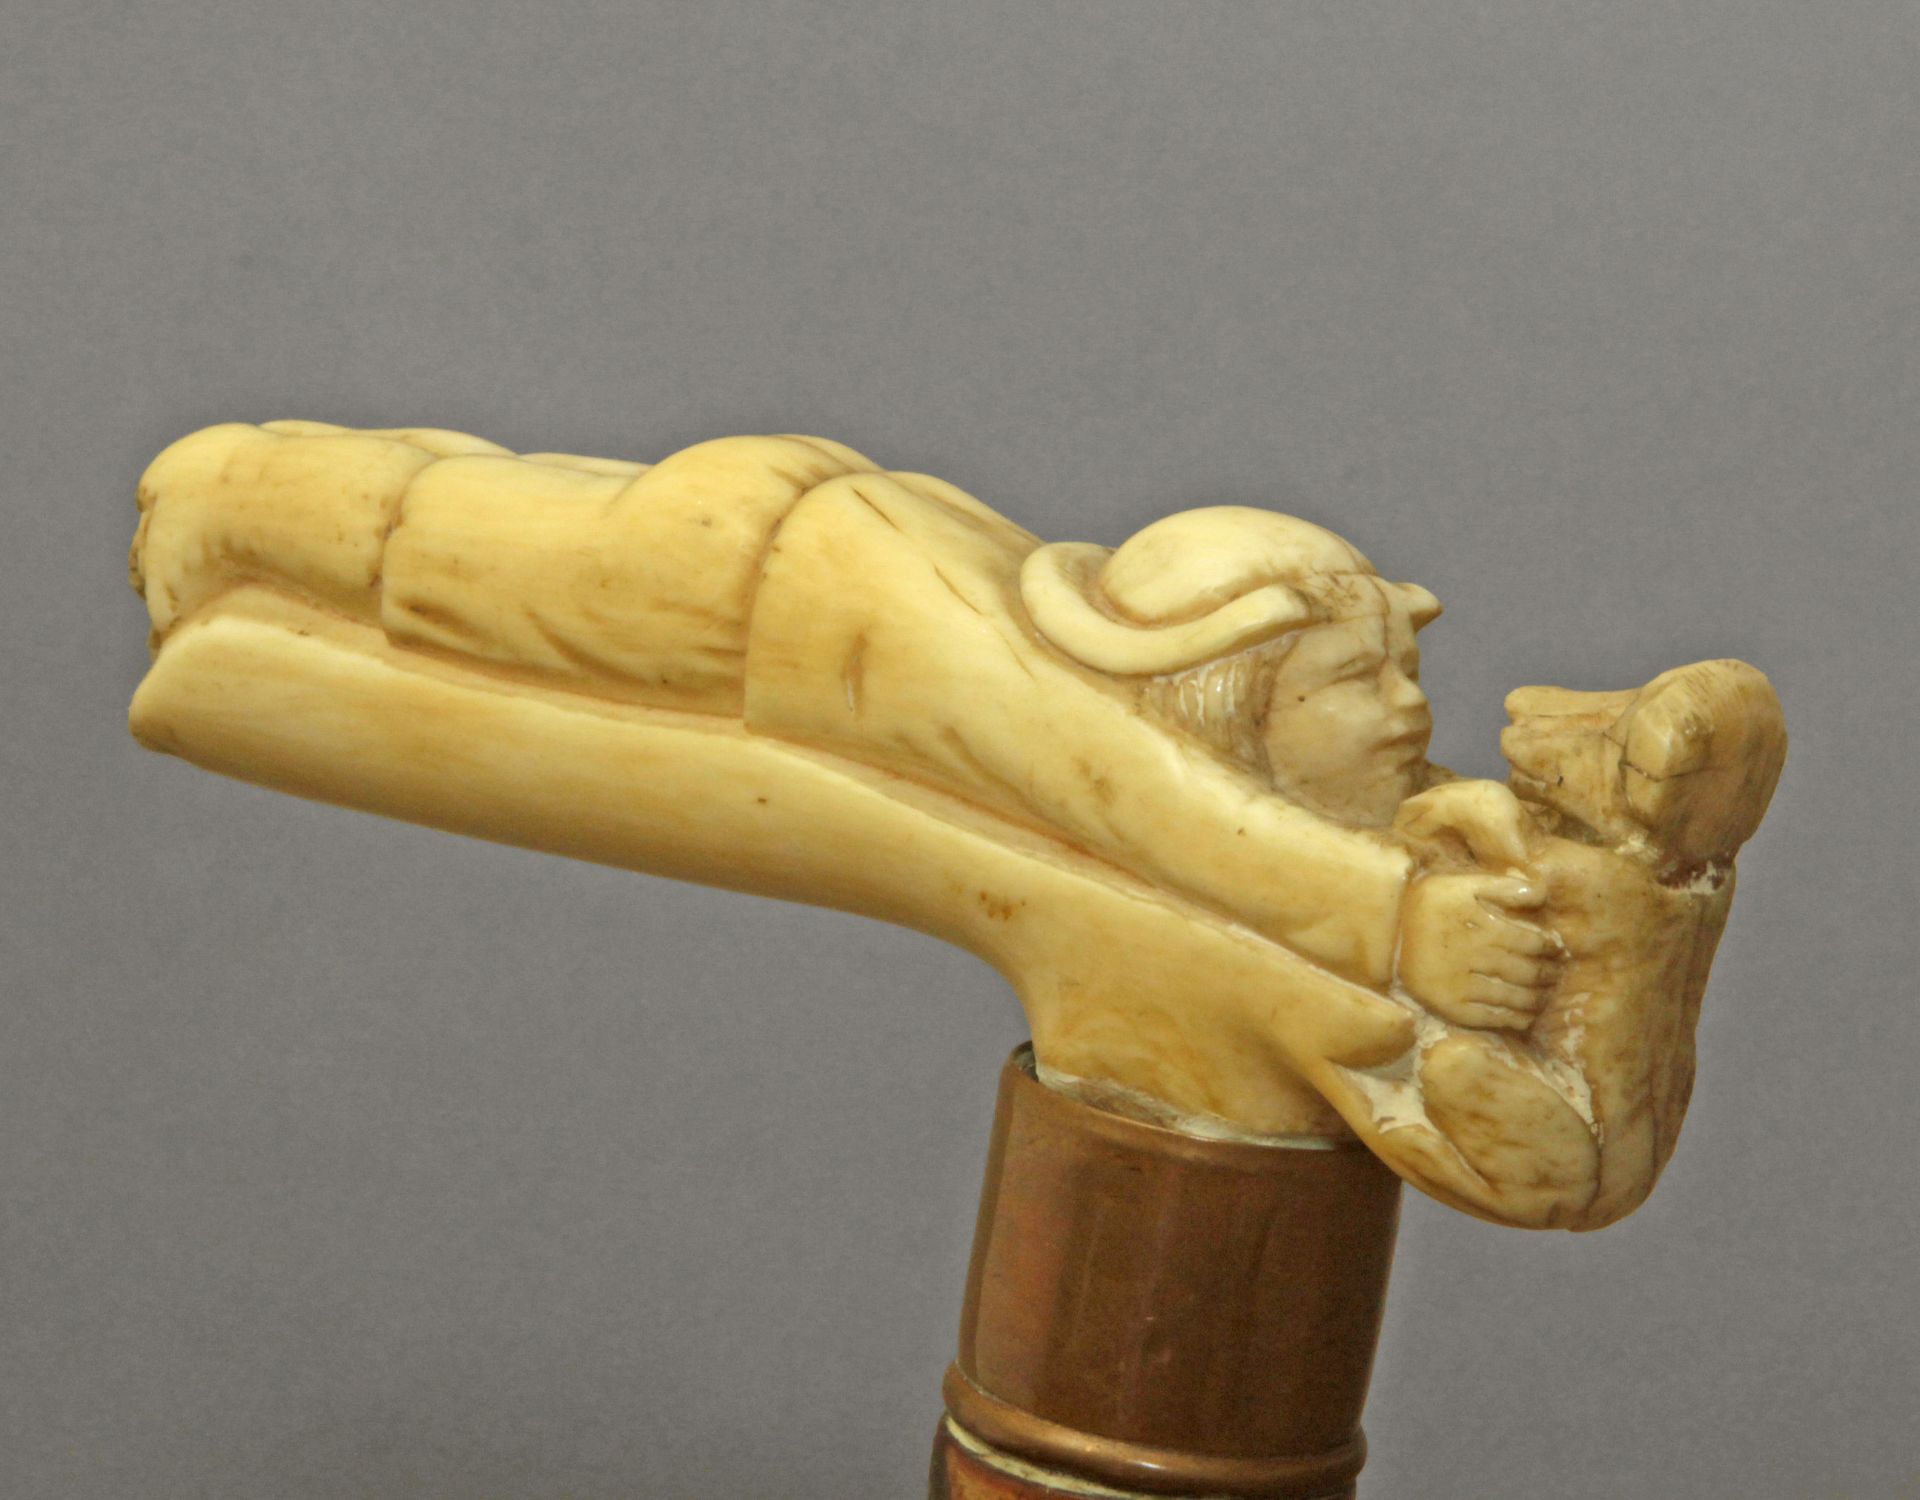 An ivory handled walking cane, Central Europe, 19th century